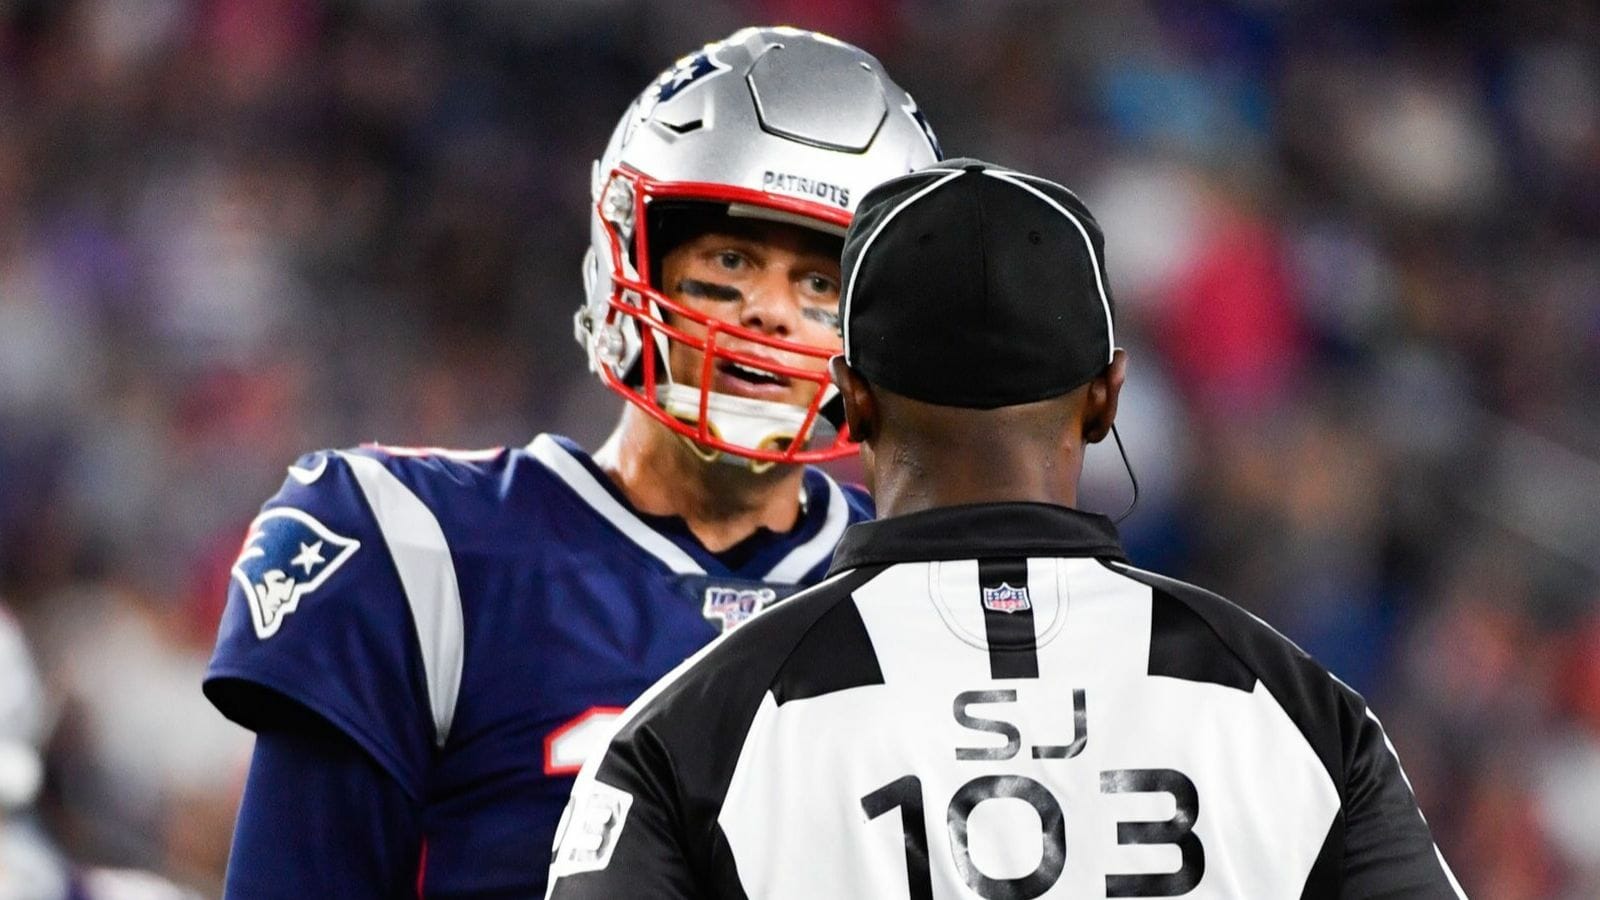 New England Patriots quarterback Tom Brady has a word with side judge Eugene Hall during a preseason game against the Carolina Panthers at Gillette Stadium.